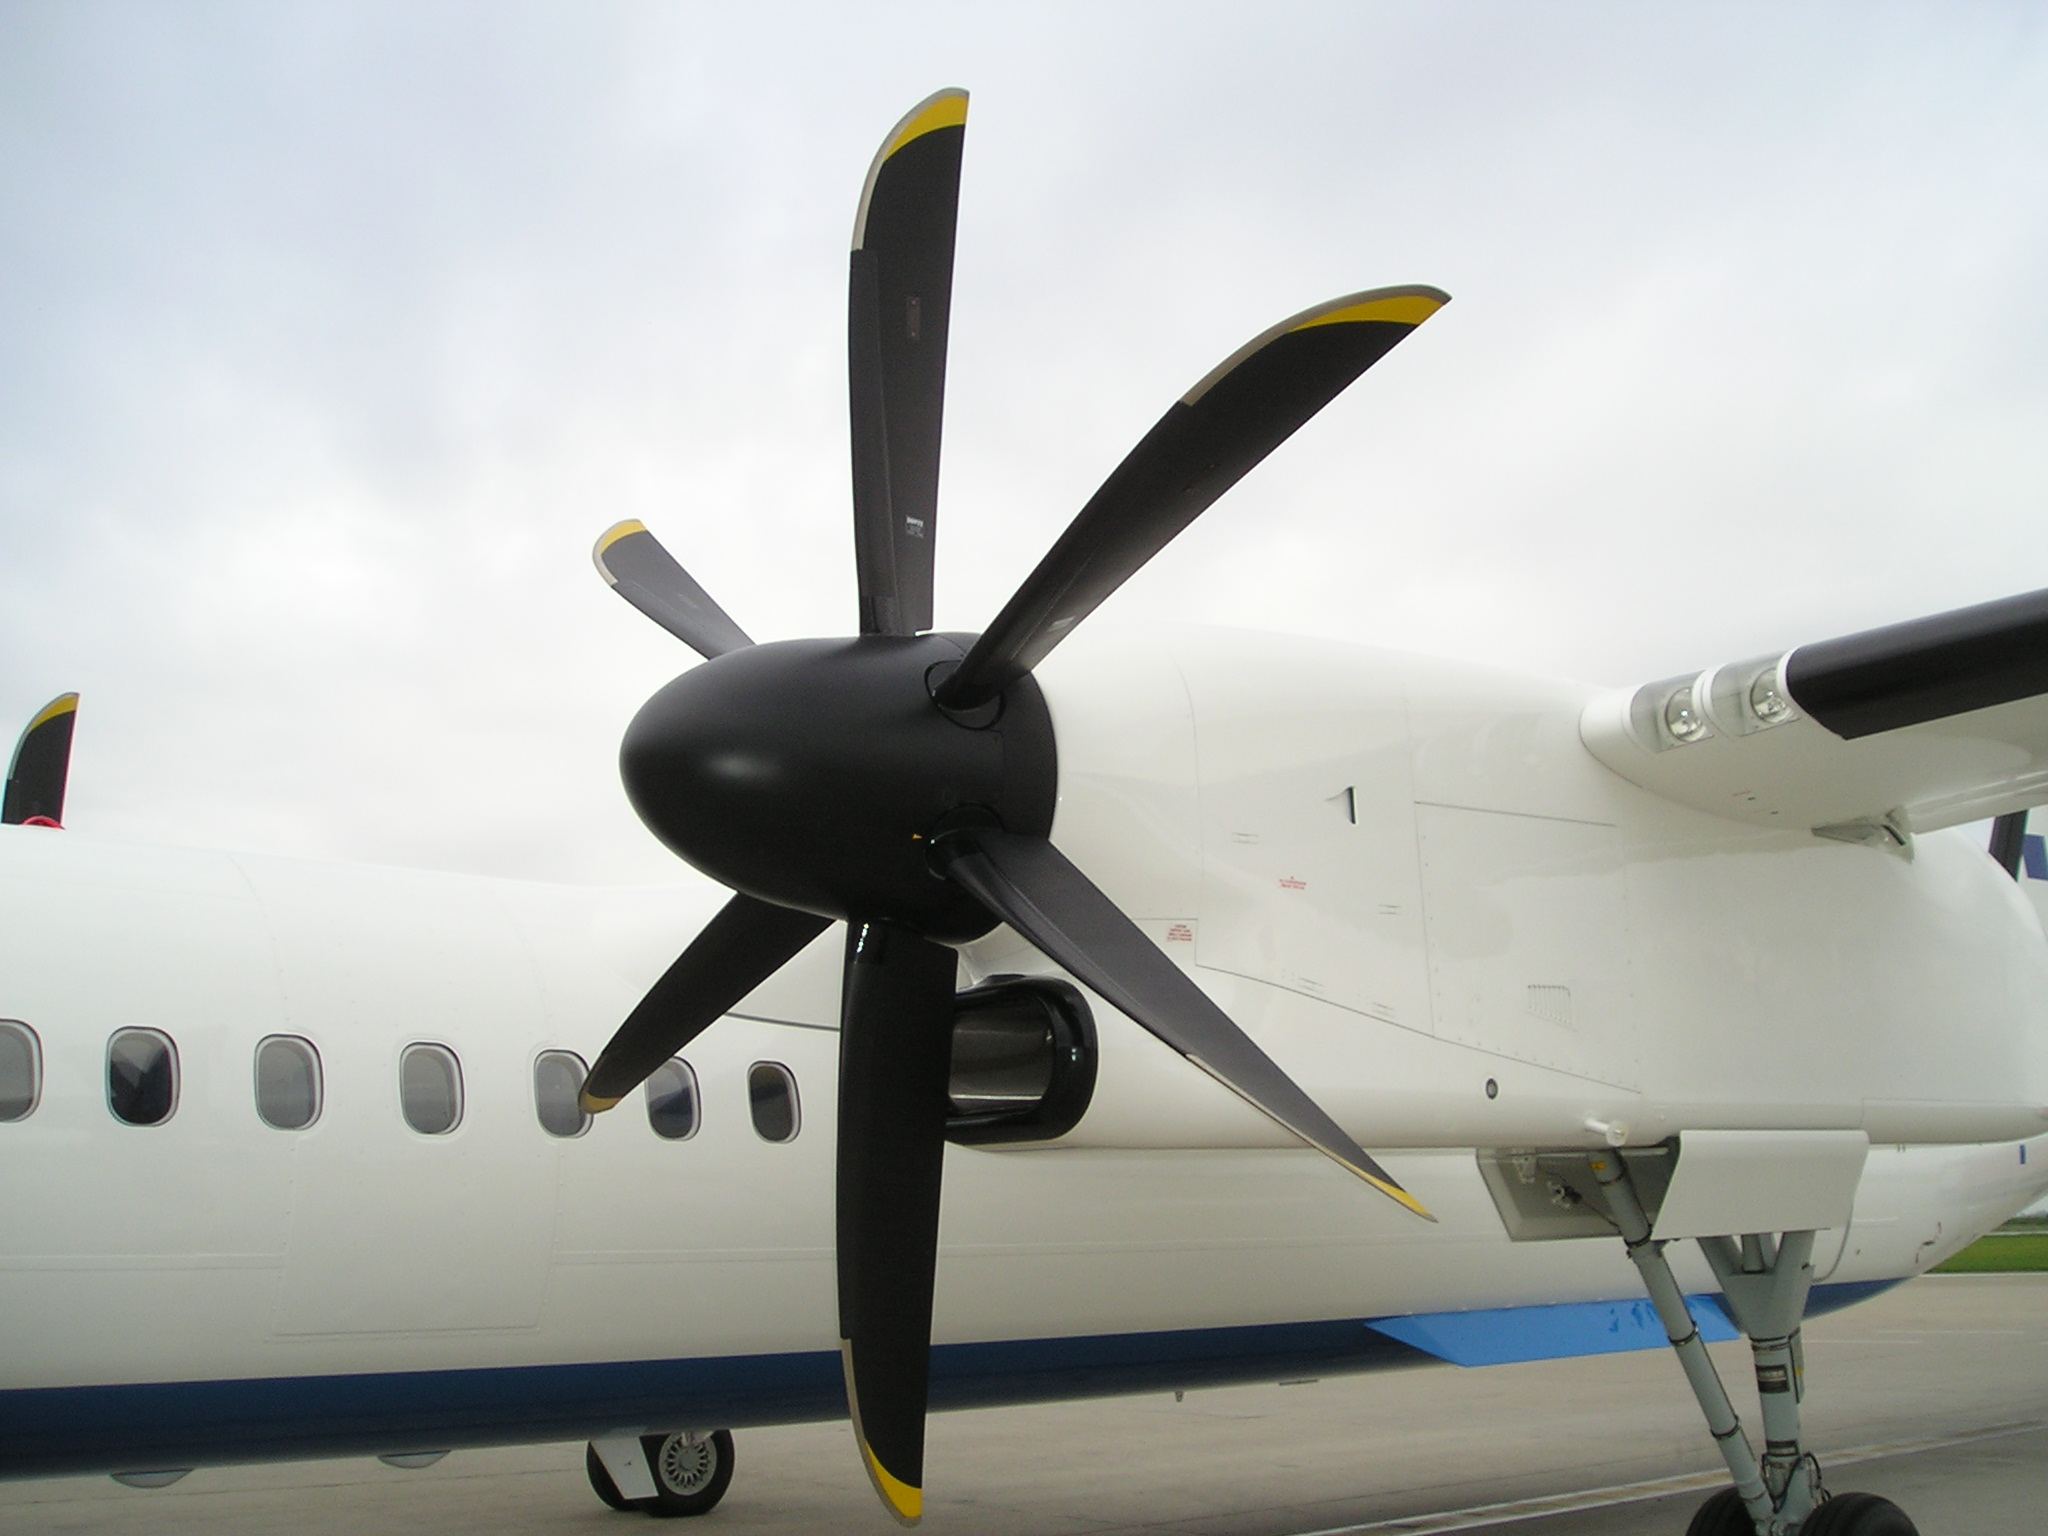 Propeller of the PW150 turboprop engine on a De Havilland Canada DHC-8-402Q Dash 8 aircraft